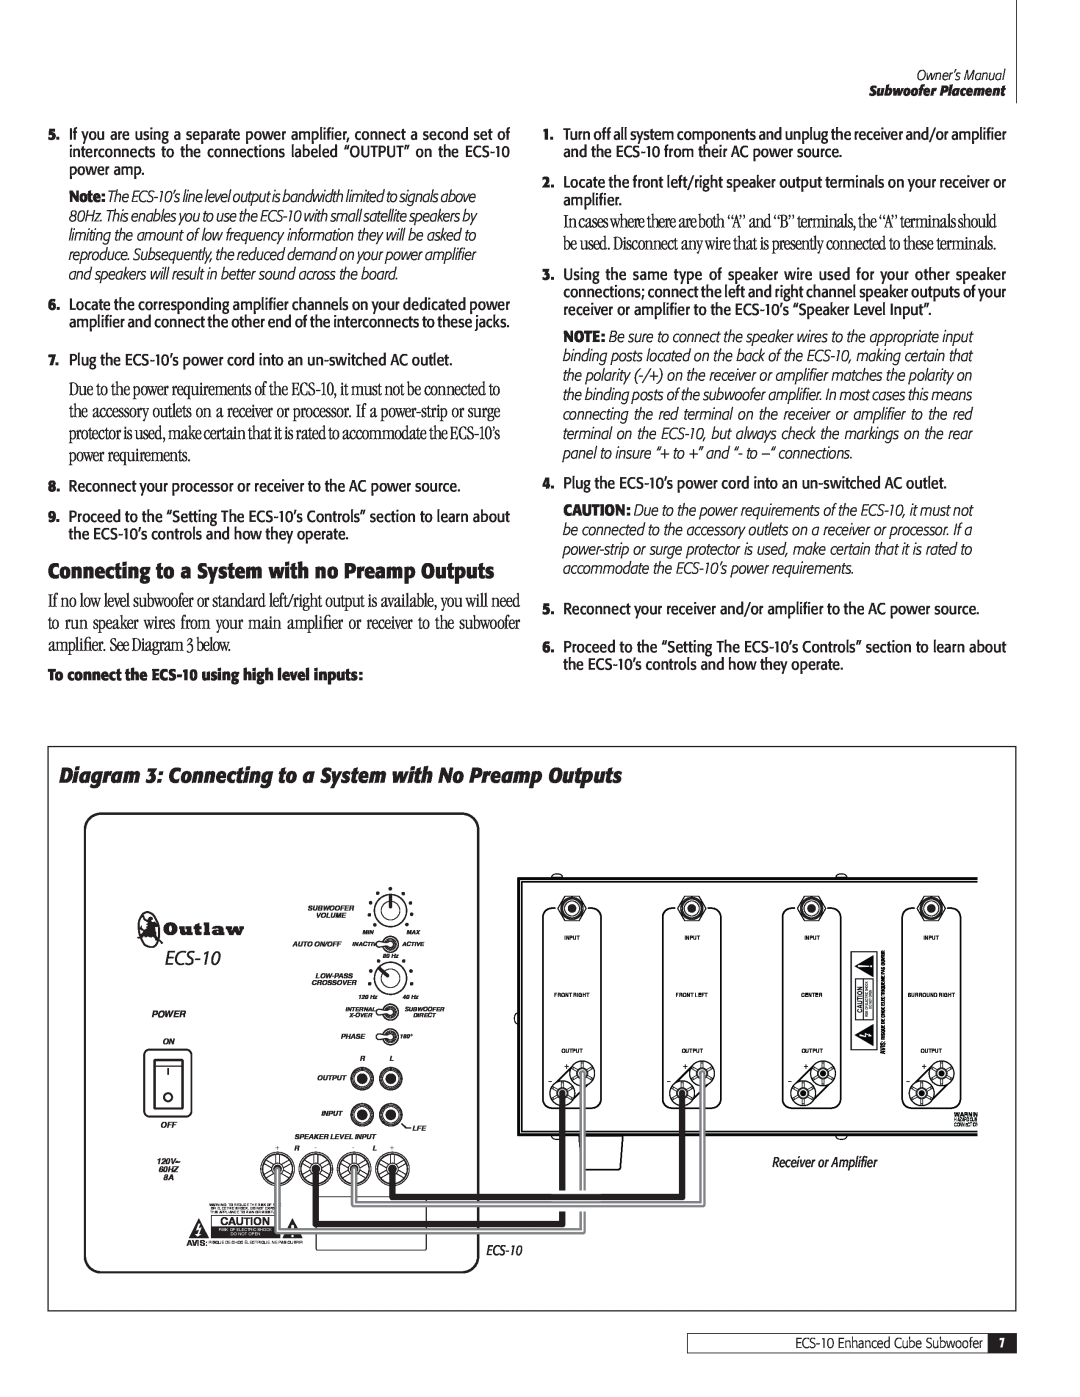 Outlaw Audio ECS-10 owner manual Connecting to a System with no Preamp Outputs 